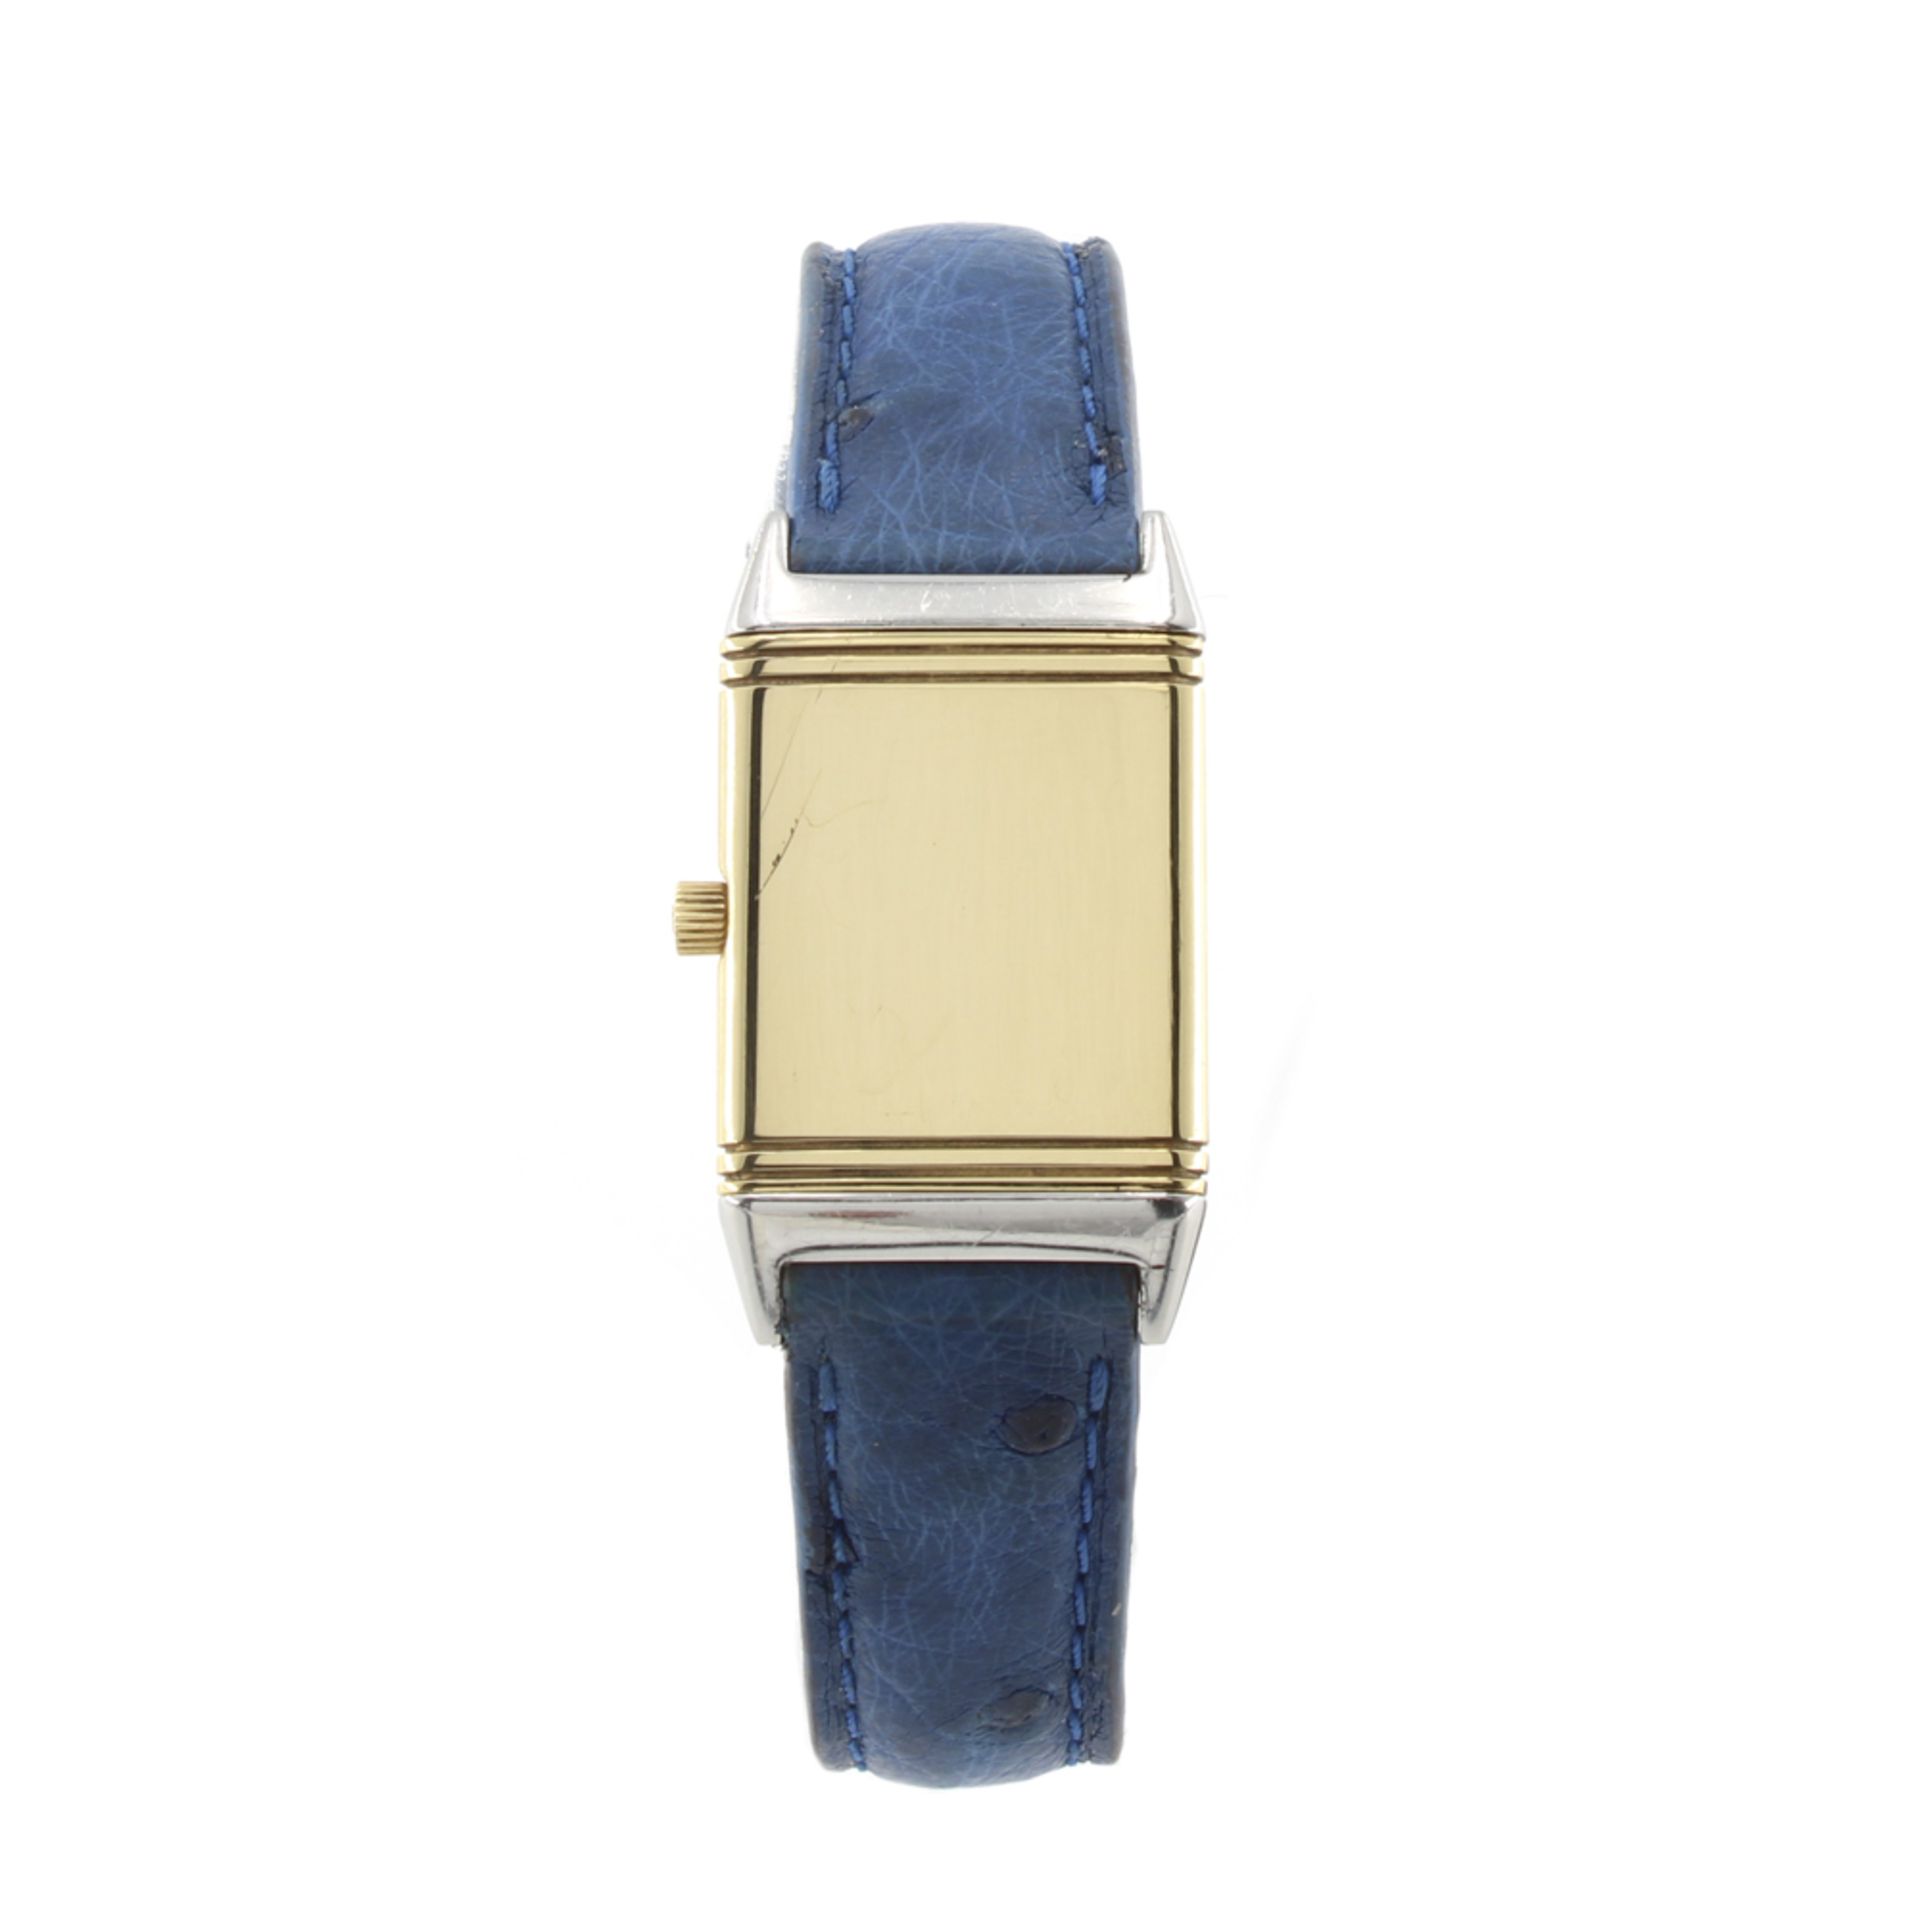 Jager Le Coultre Reverso vintage ladies watch - Image 2 of 3